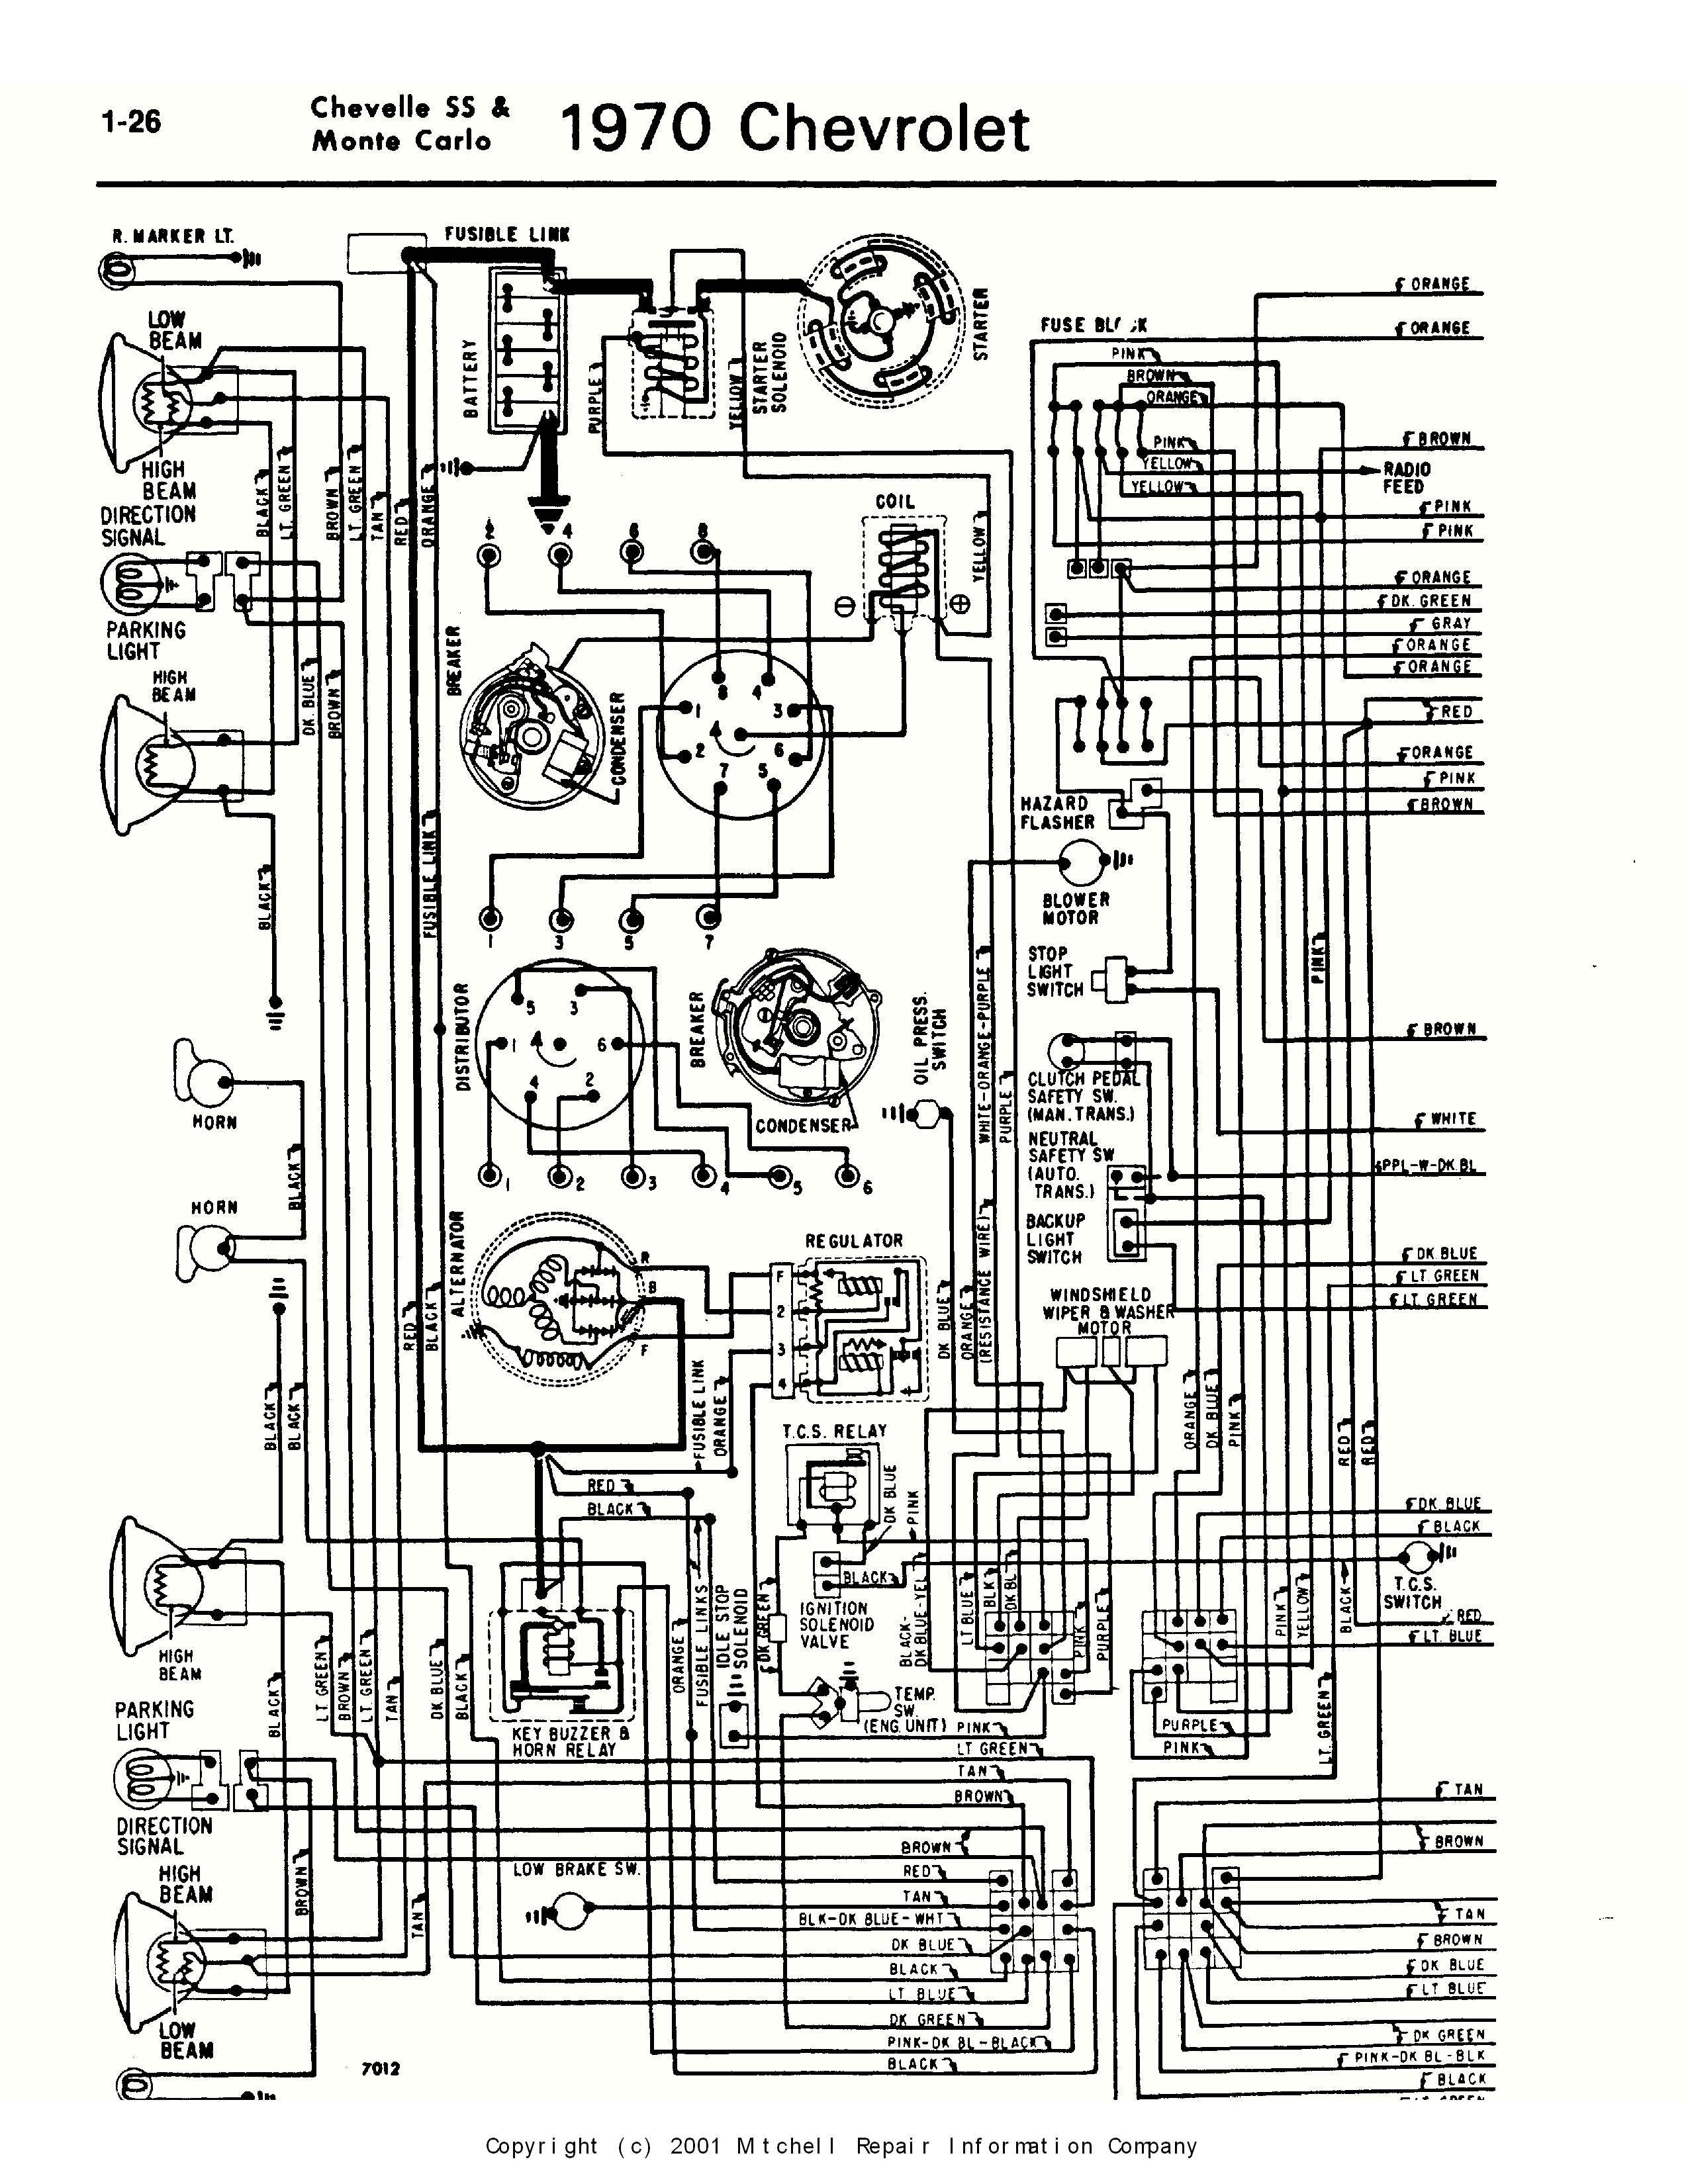 Old 1971 Chevrolet Truck Wiring Diagrams from www.wiring-wizard.com